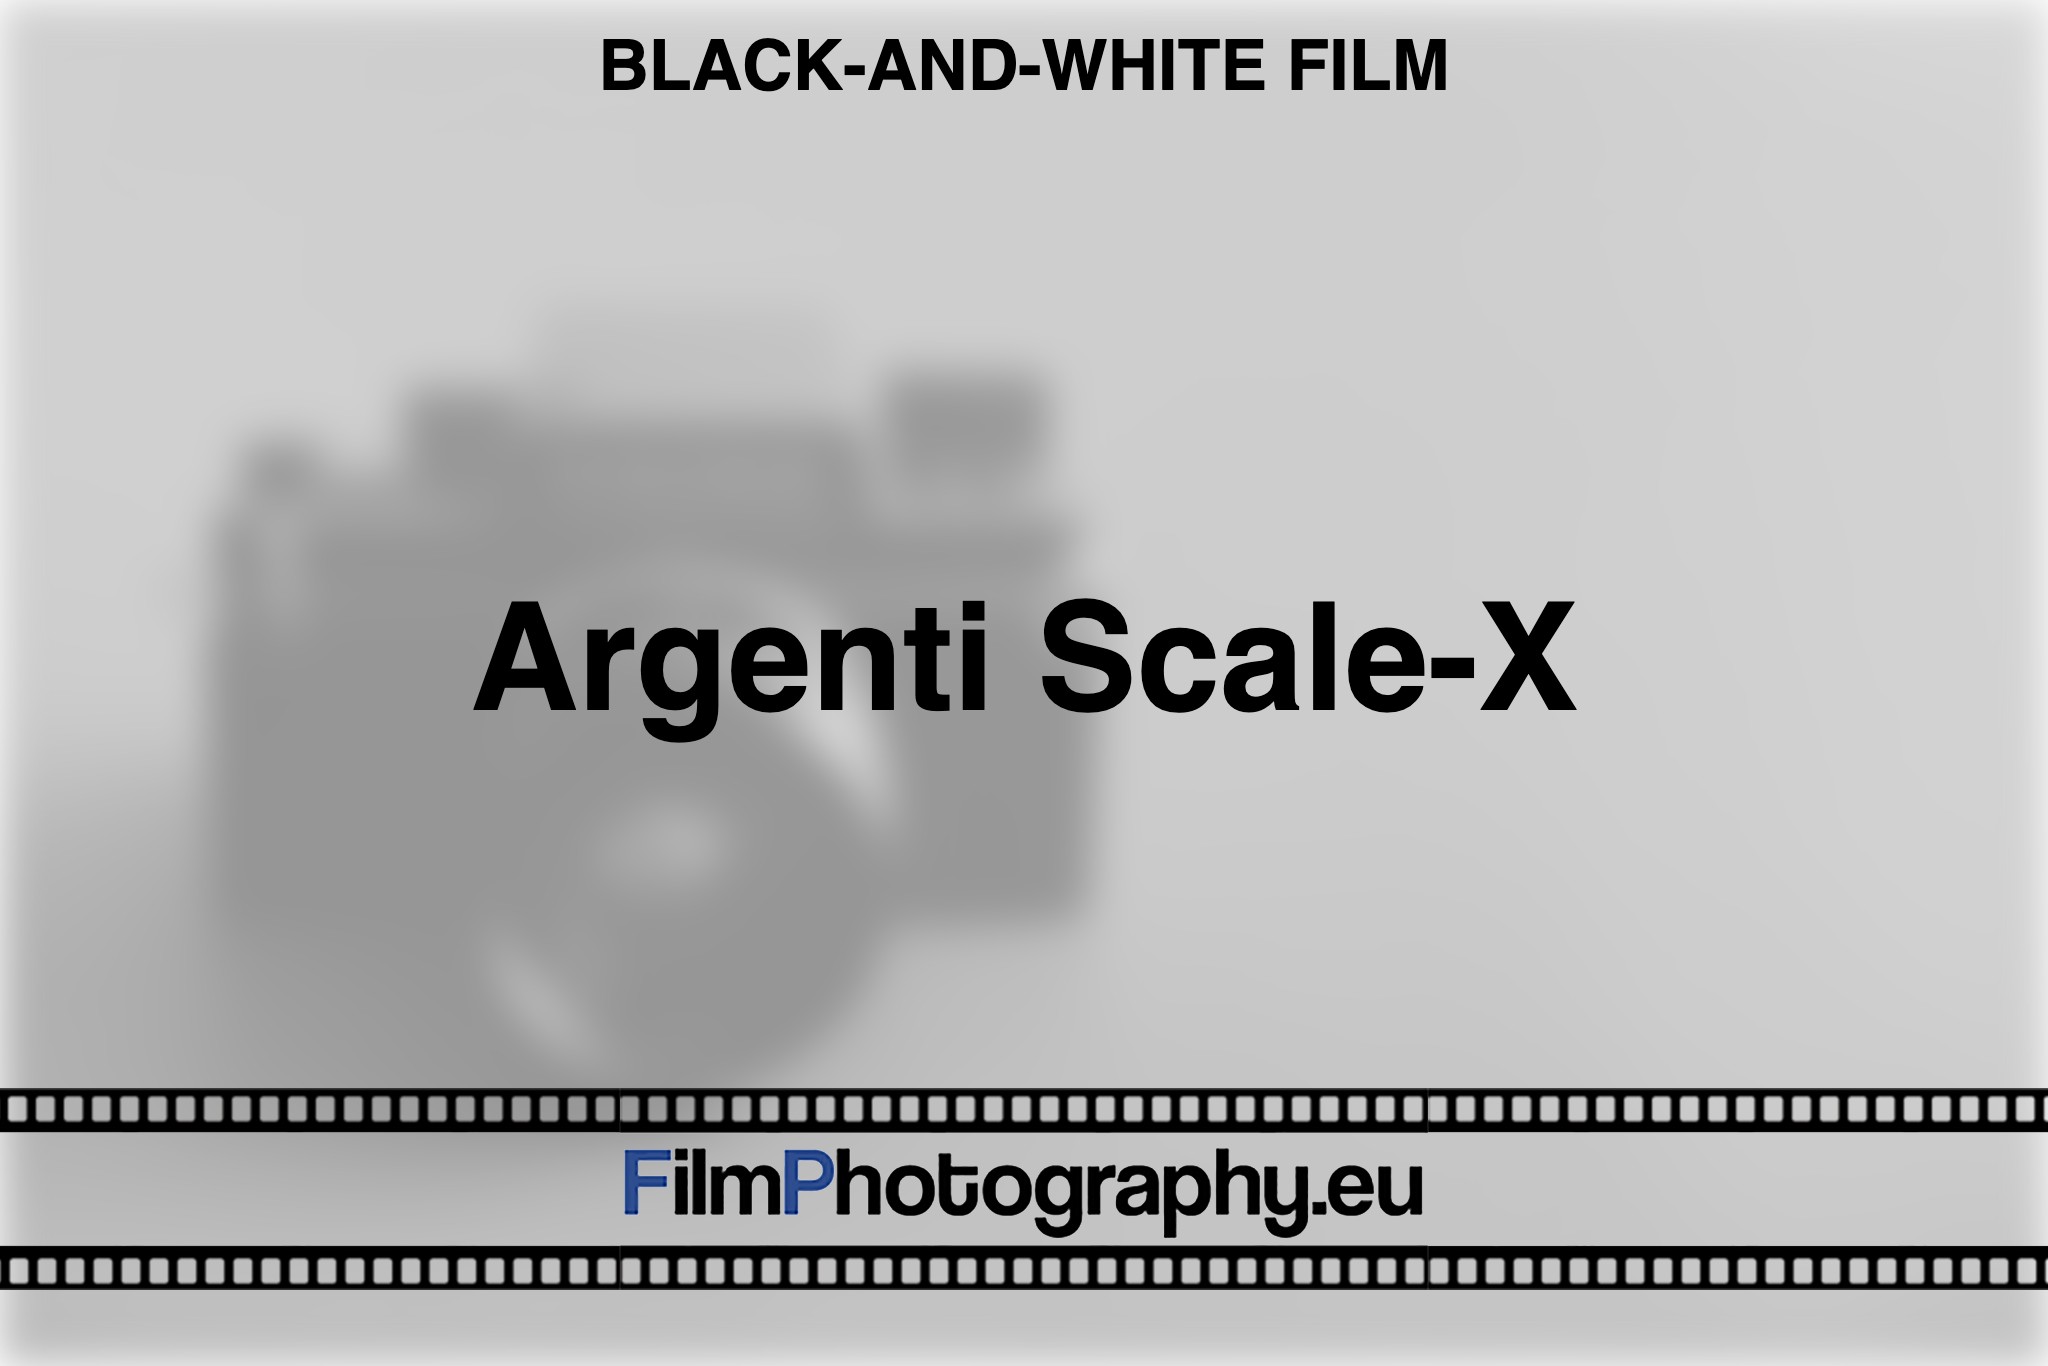 argenti-scale-x-black-and-white-film-bnv